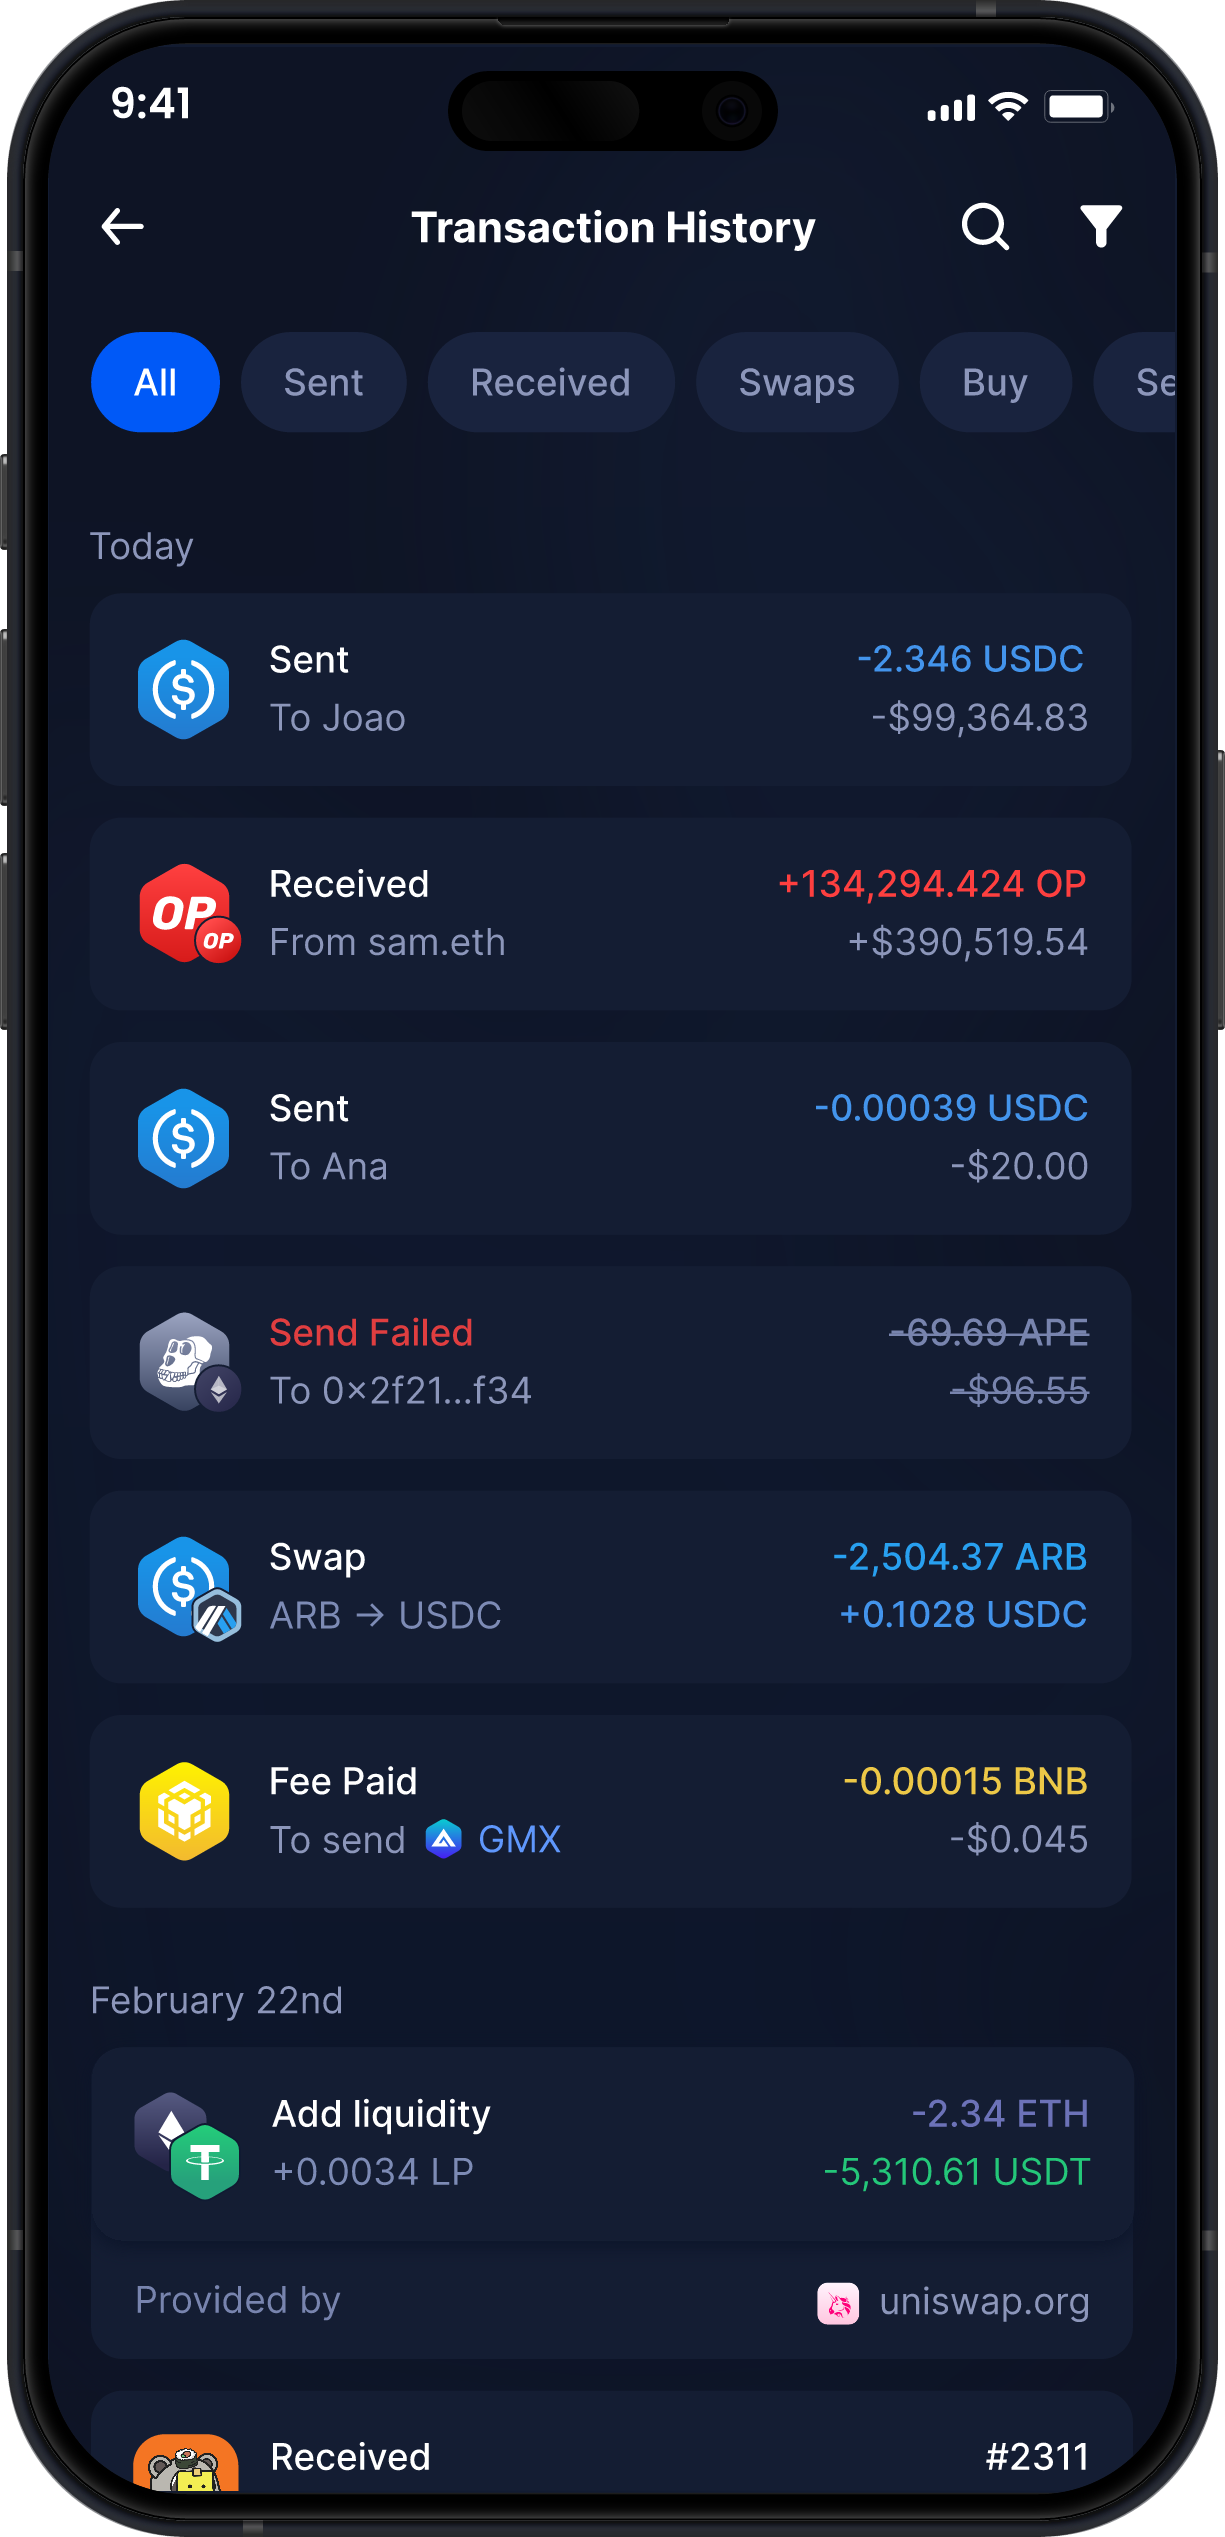 Infinity Mobile USD Coin Wallet - Complete USDC Transaction History